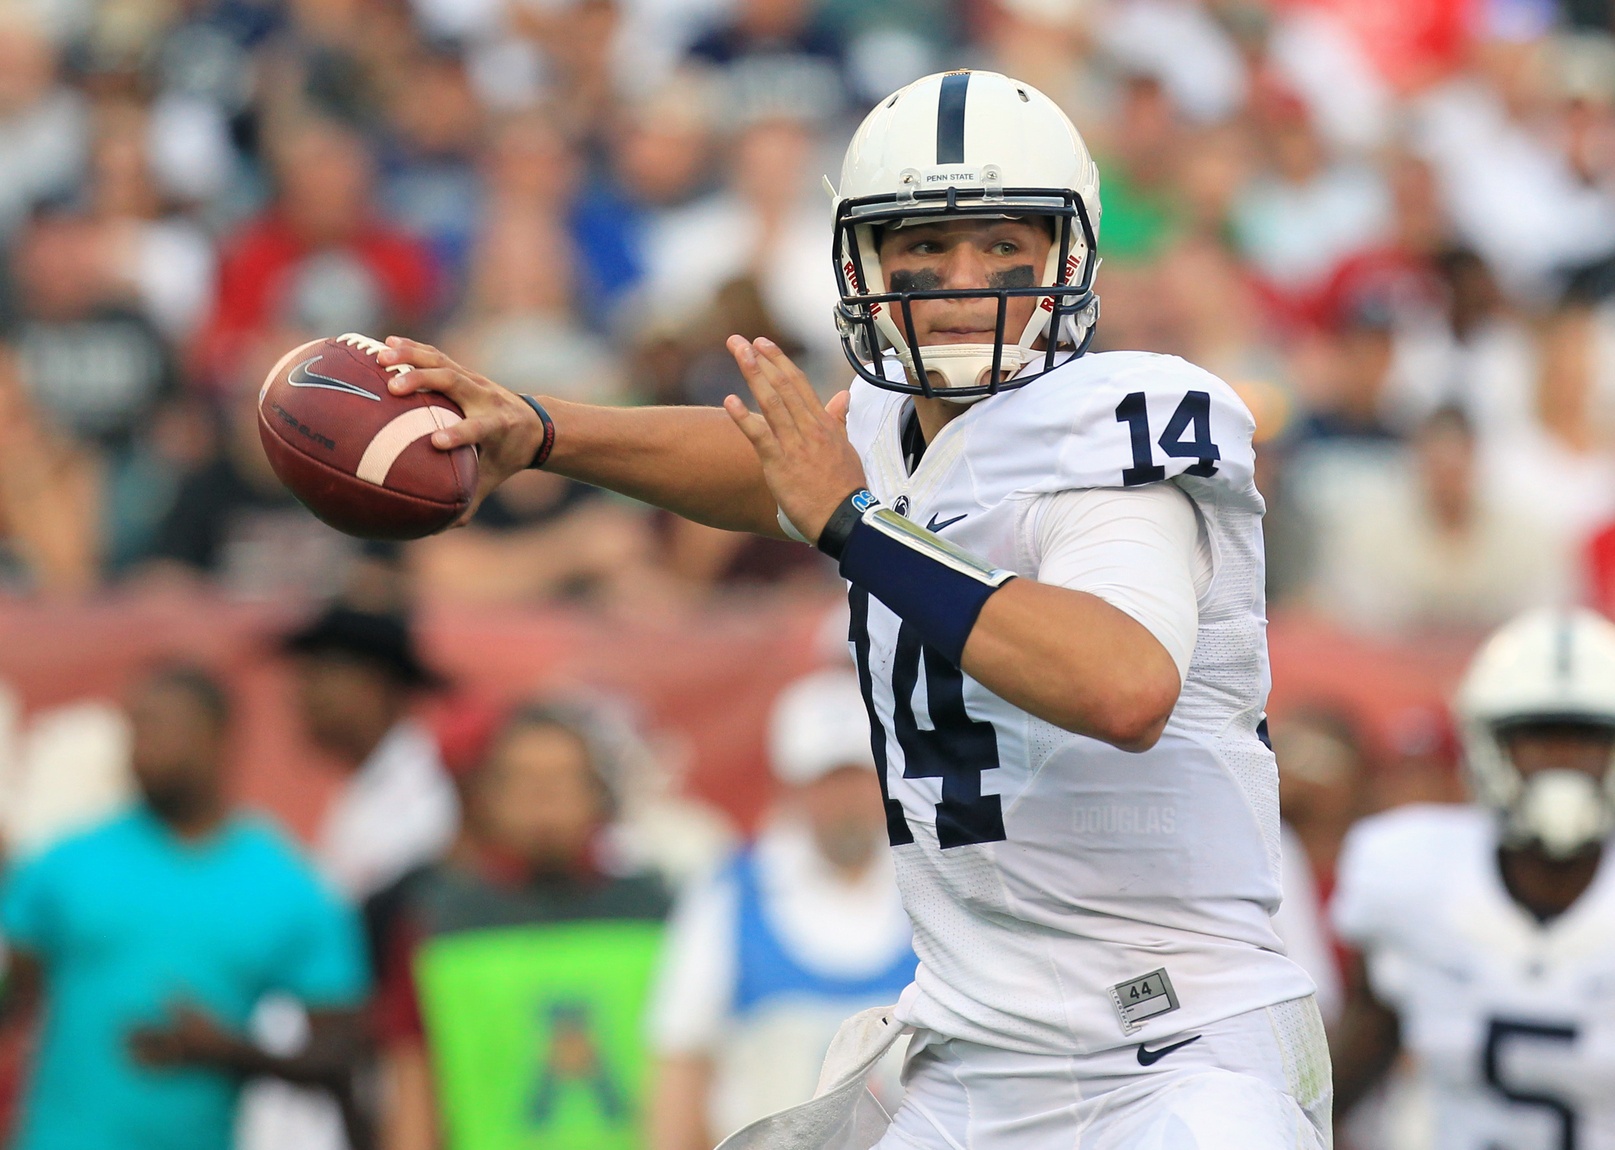 WATCH: Christian Hackenberg starts AAF career with awful INT1615 x 1150